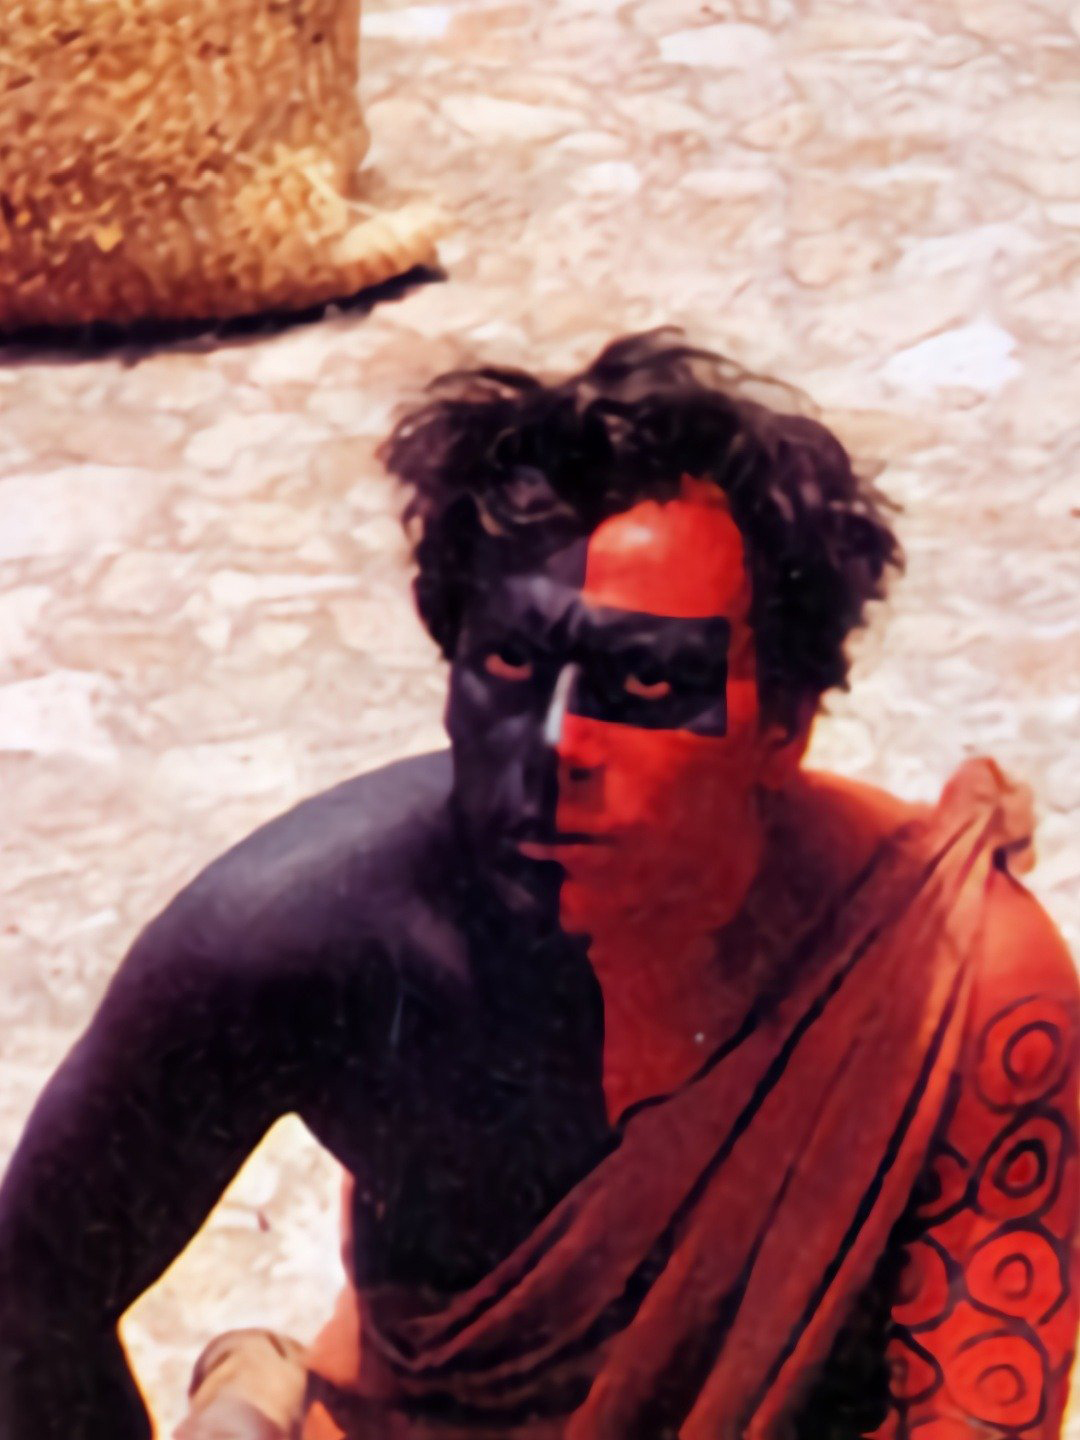 A person with short dark hair and red and black full body paint looks up toward the camera.